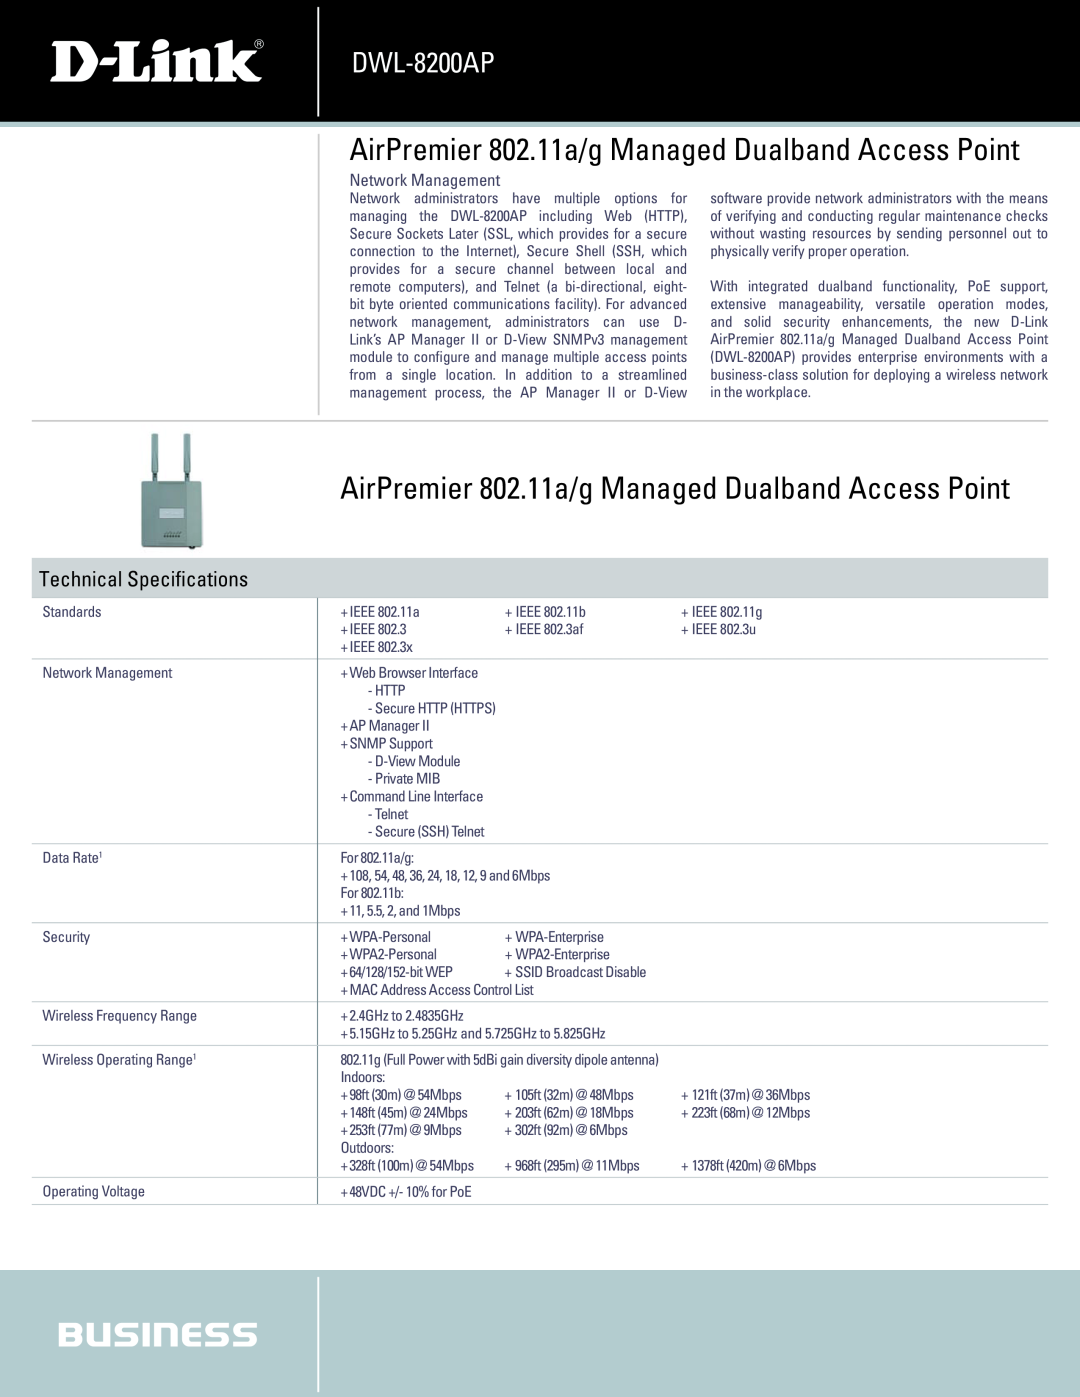 D-Link DWL-8200AP manual Technical Speciﬁcations, AirPremier 802.11a/g Managed Dualband Access Point, Network Management 